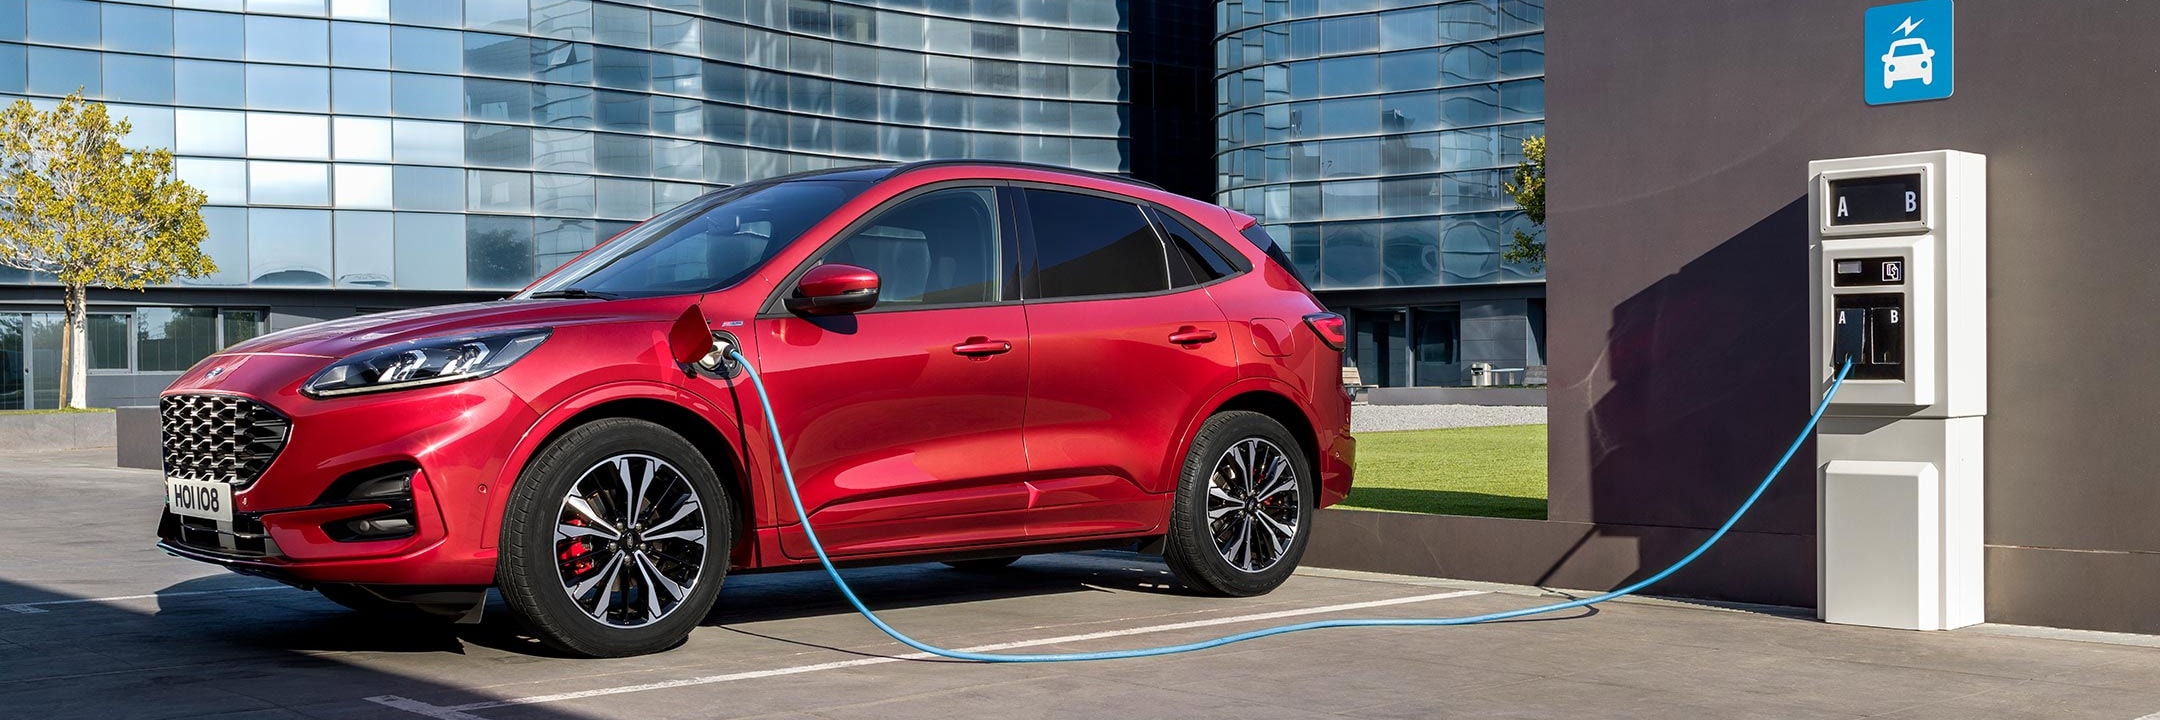 Red Kuga Hybrid Electric Vehicle charging at a public charging point in front of glass buildings